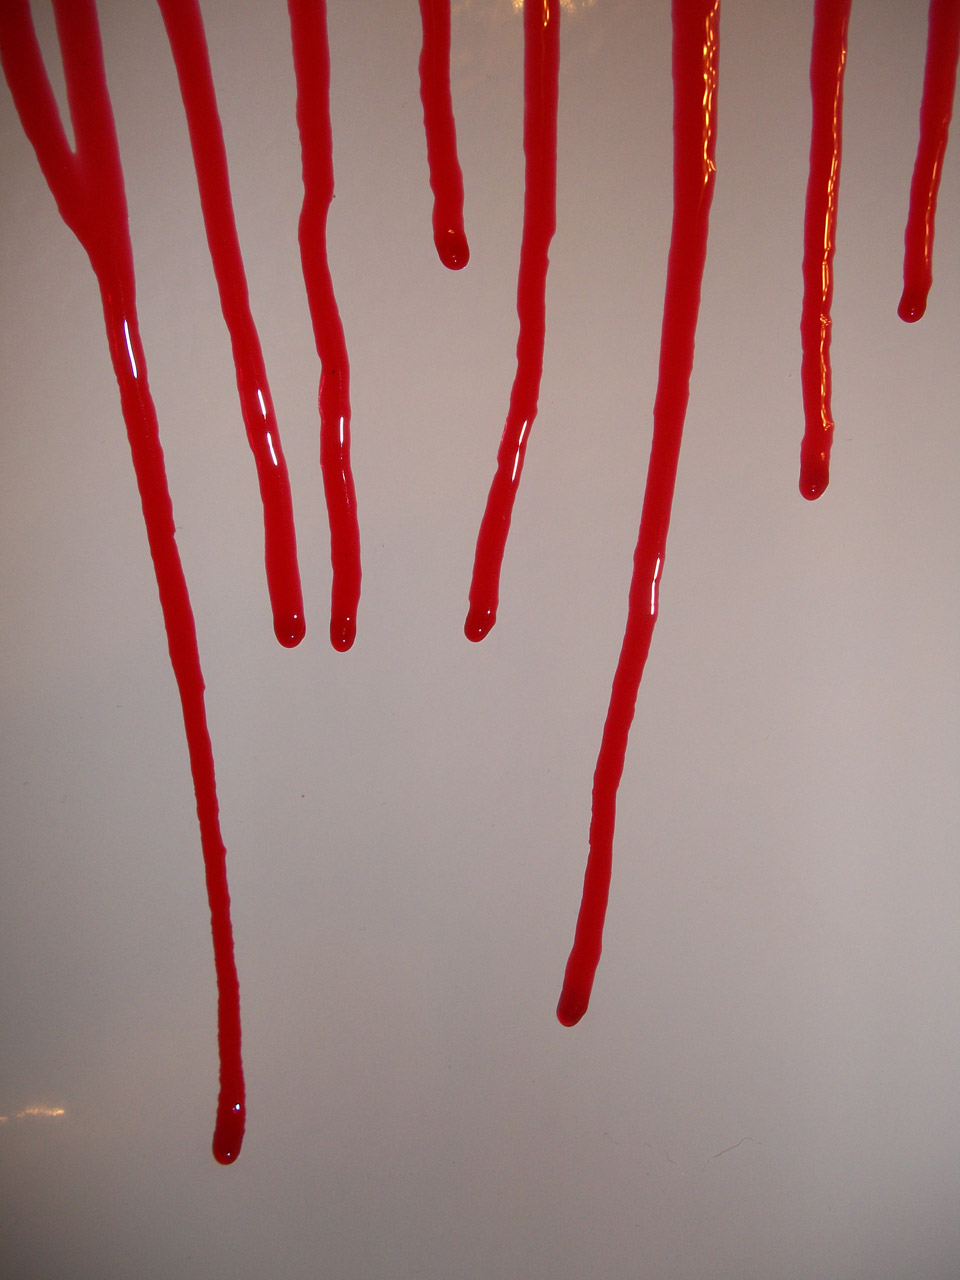 blood gore spooky free photo